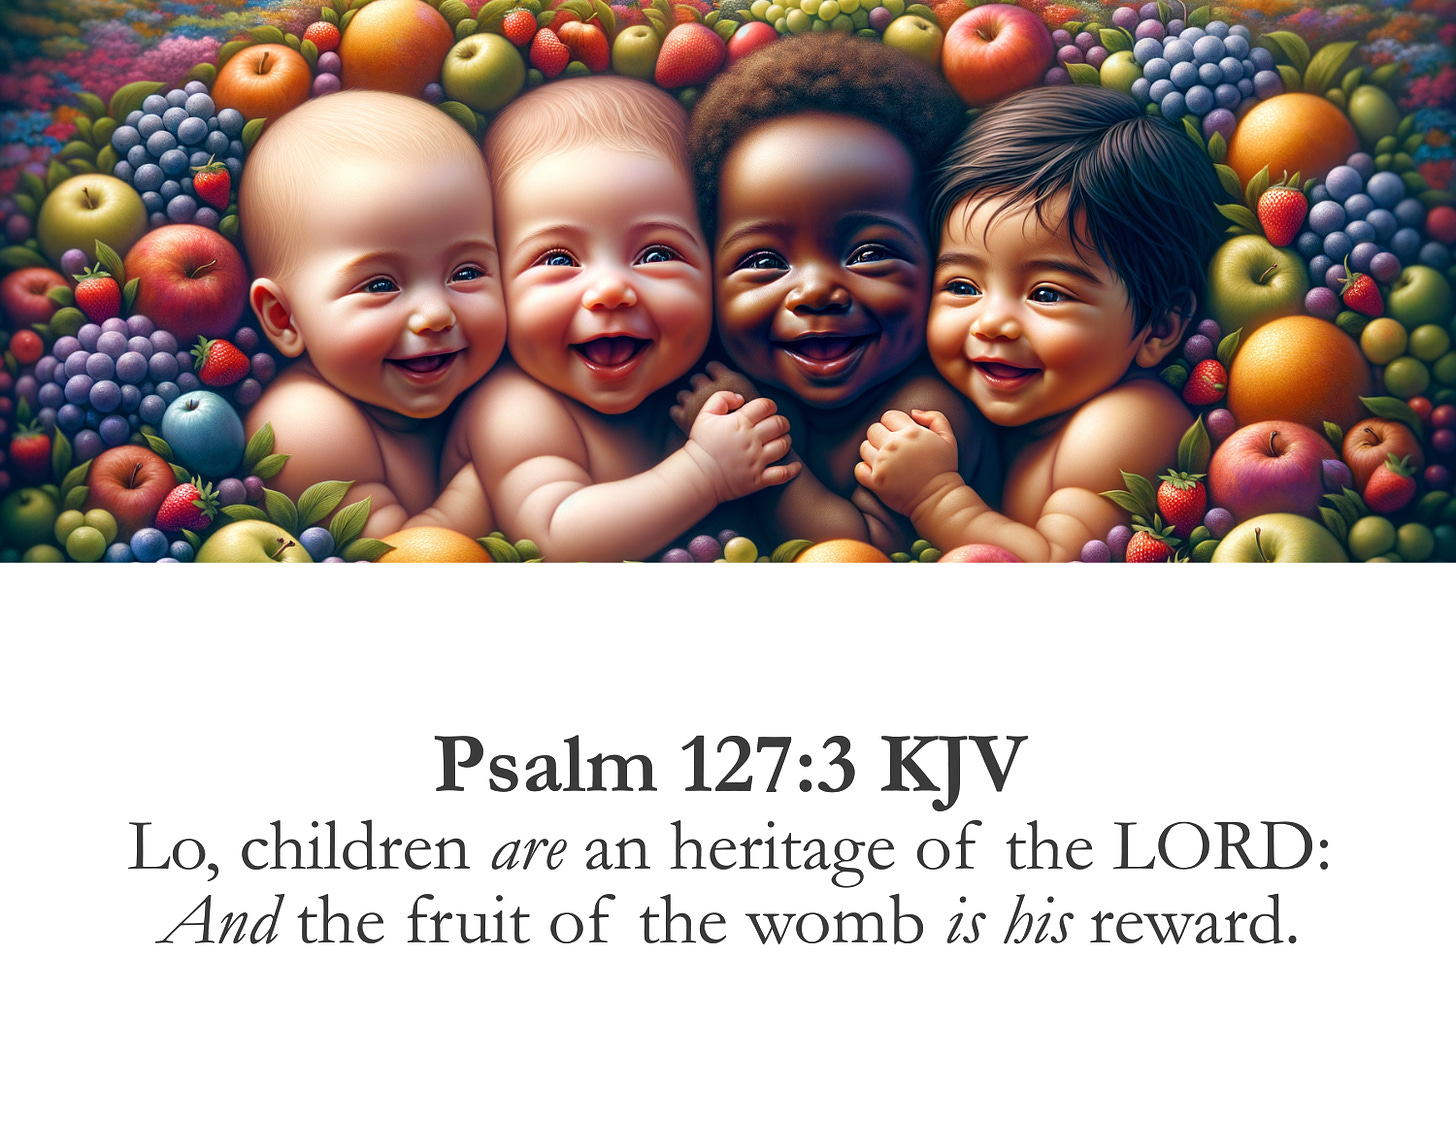 This image depicts four smiling and laughing baby figures of different ethnicities surrounded by a vibrant array of fruits, including apples, oranges, grapes, and strawberries. The text at the bottom quotes Psalm 127:3 from the King James Version of the Bible, which states "Lo, children are an heritage of the LORD: and the fruit of the womb is his reward." The image conveys a joyful and celebratory message about the preciousness of children and new life, using the metaphor of the abundant fruits to represent this biblical teaching.